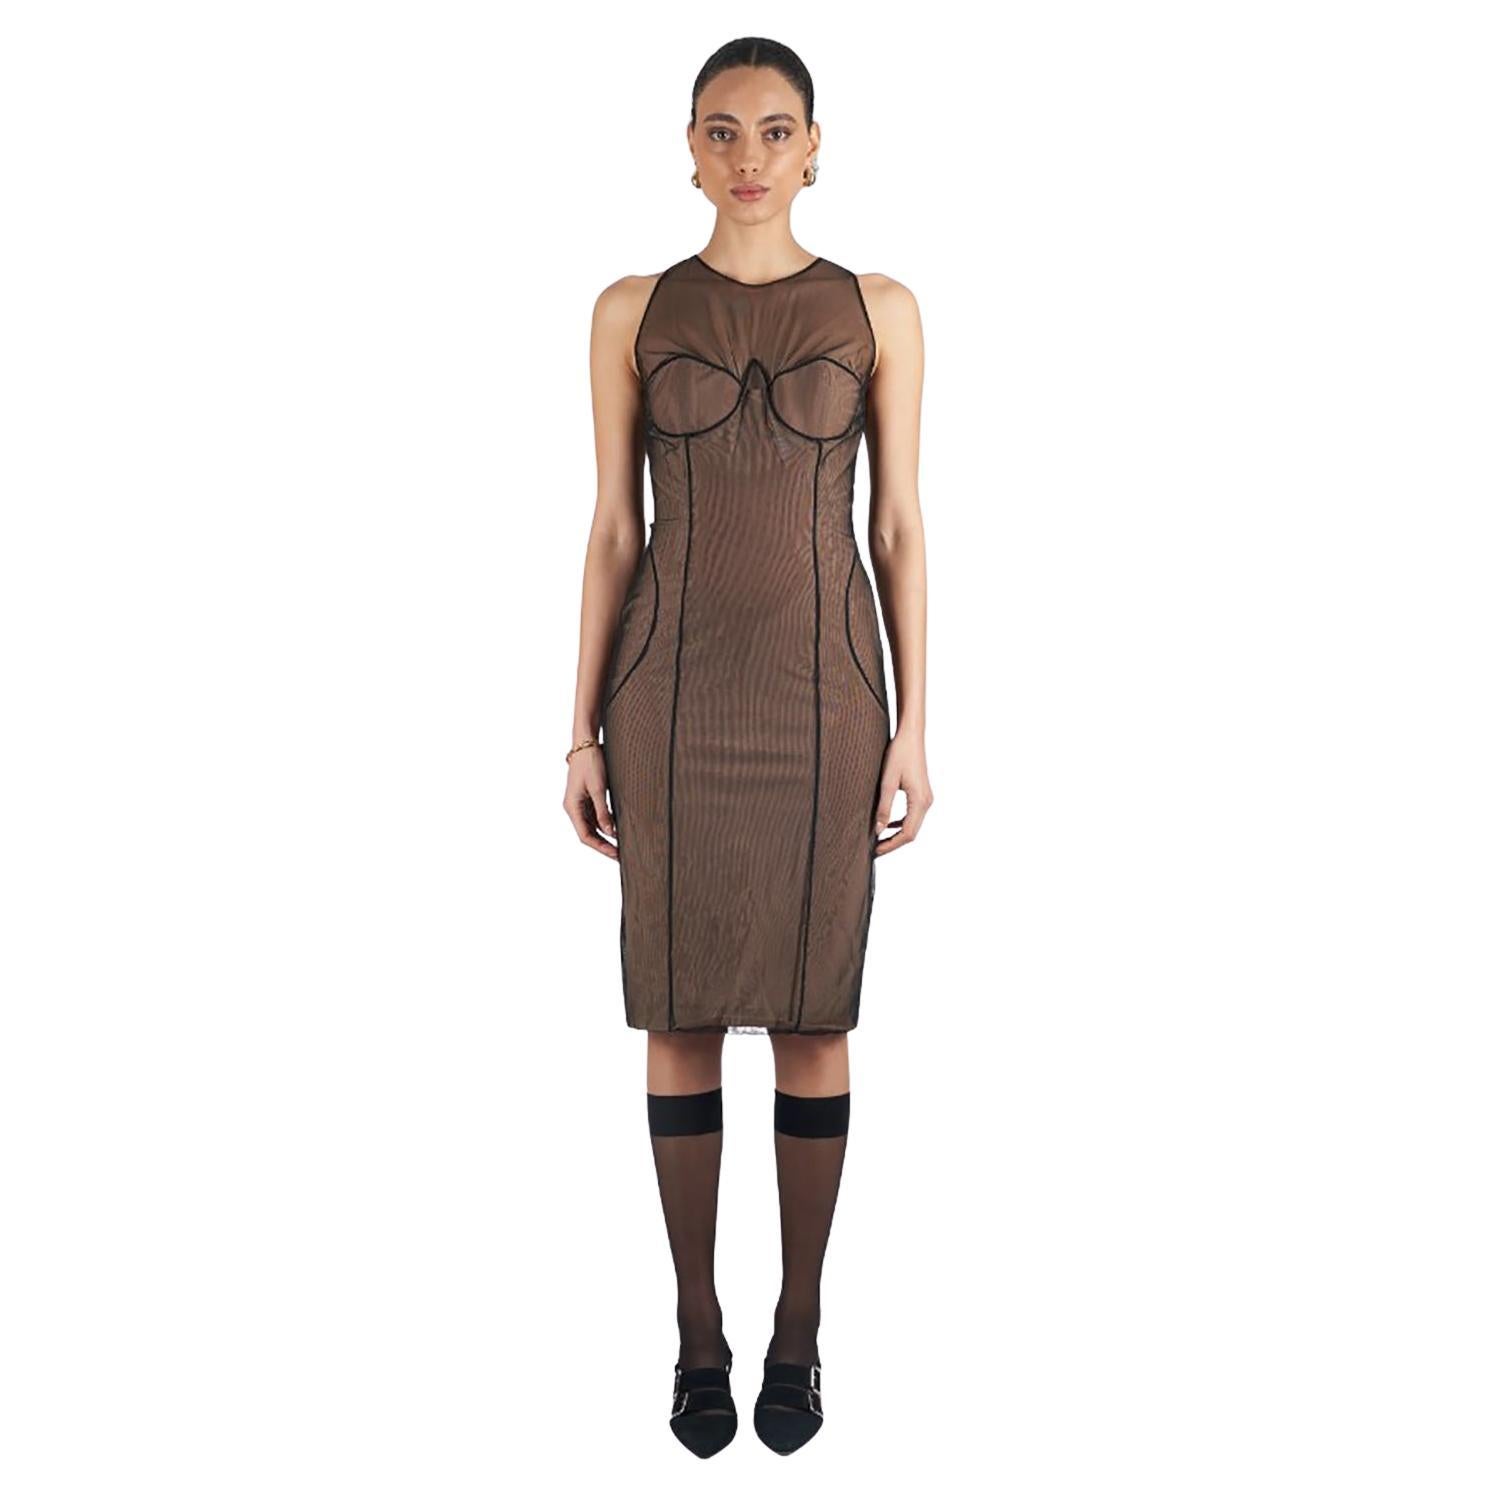 S/S 2001 TOM FORD for GUCCI VINTAGE NUDE/BLACK MESH DRESS IT 42 - US 6